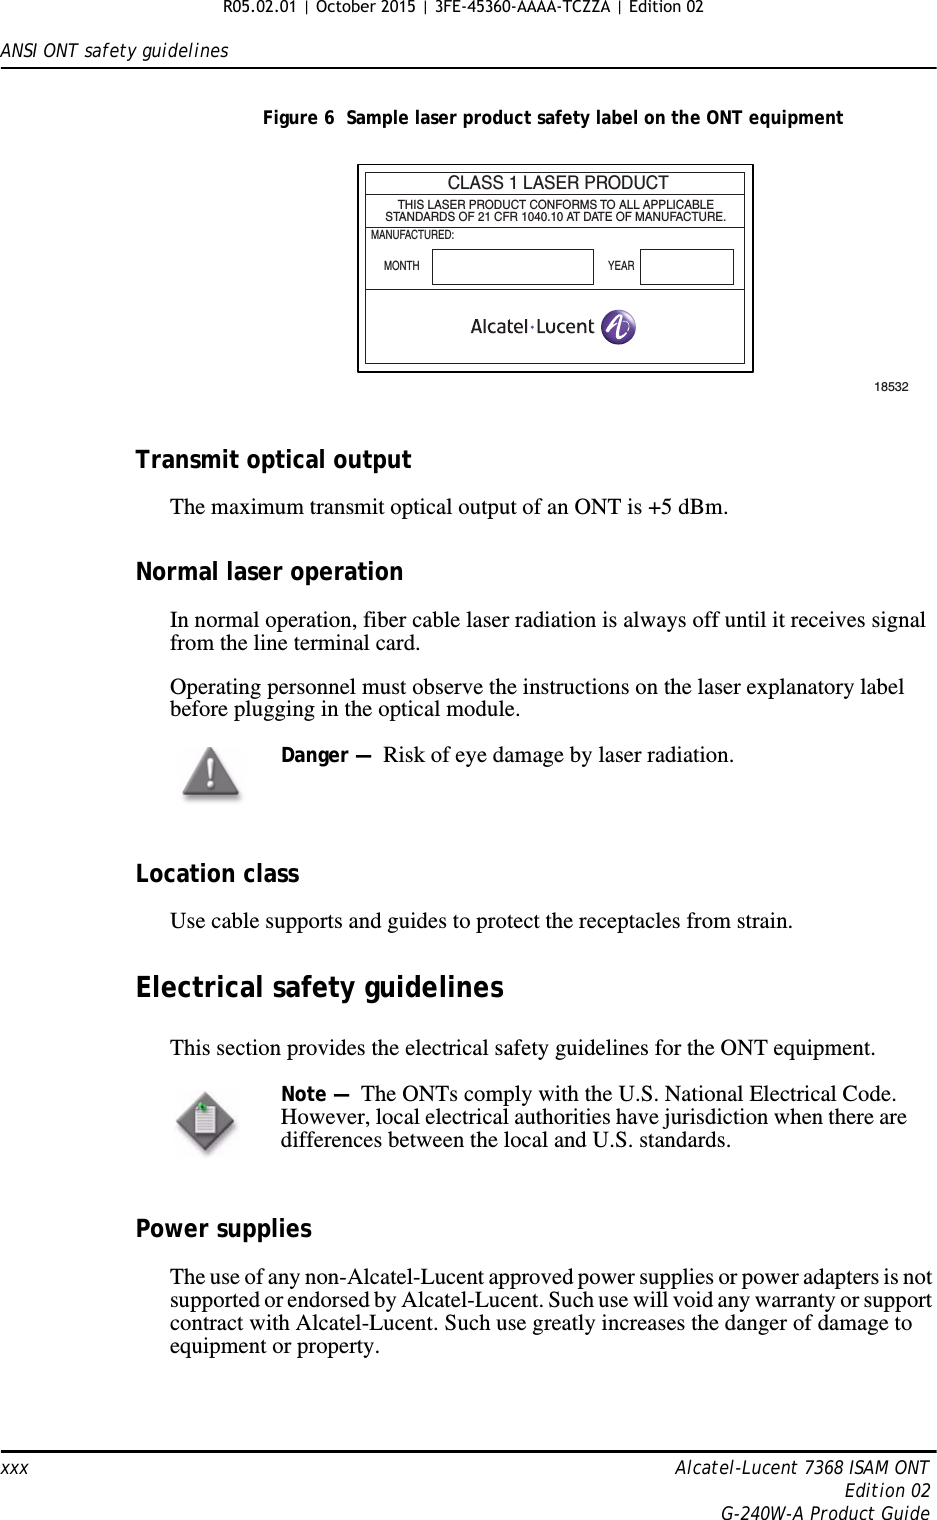 ANSI ONT safety guidelinesxxx Alcatel-Lucent 7368 ISAM ONTEdition 02G-240W-A Product GuideFigure 6  Sample laser product safety label on the ONT equipmentTransmit optical outputThe maximum transmit optical output of an ONT is +5 dBm.Normal laser operationIn normal operation, fiber cable laser radiation is always off until it receives signal from the line terminal card.Operating personnel must observe the instructions on the laser explanatory label before plugging in the optical module.Location classUse cable supports and guides to protect the receptacles from strain.Electrical safety guidelinesThis section provides the electrical safety guidelines for the ONT equipment.Power suppliesThe use of any non-Alcatel-Lucent approved power supplies or power adapters is not supported or endorsed by Alcatel-Lucent. Such use will void any warranty or support contract with Alcatel-Lucent. Such use greatly increases the danger of damage to equipment or property.CLASS 1 LASER PRODUCTTHIS LASER PRODUCT CONFORMS TO ALL APPLICABLESTANDARDS OF 21 CFR 1040.10 AT DATE OF MANUFACTURE.MANUFACTURED:MONTH YEAR18532Danger —  Risk of eye damage by laser radiation.Note —  The ONTs comply with the U.S. National Electrical Code. However, local electrical authorities have jurisdiction when there are differences between the local and U.S. standards. R05.02.01 | October 2015 | 3FE-45360-AAAA-TCZZA | Edition 02 